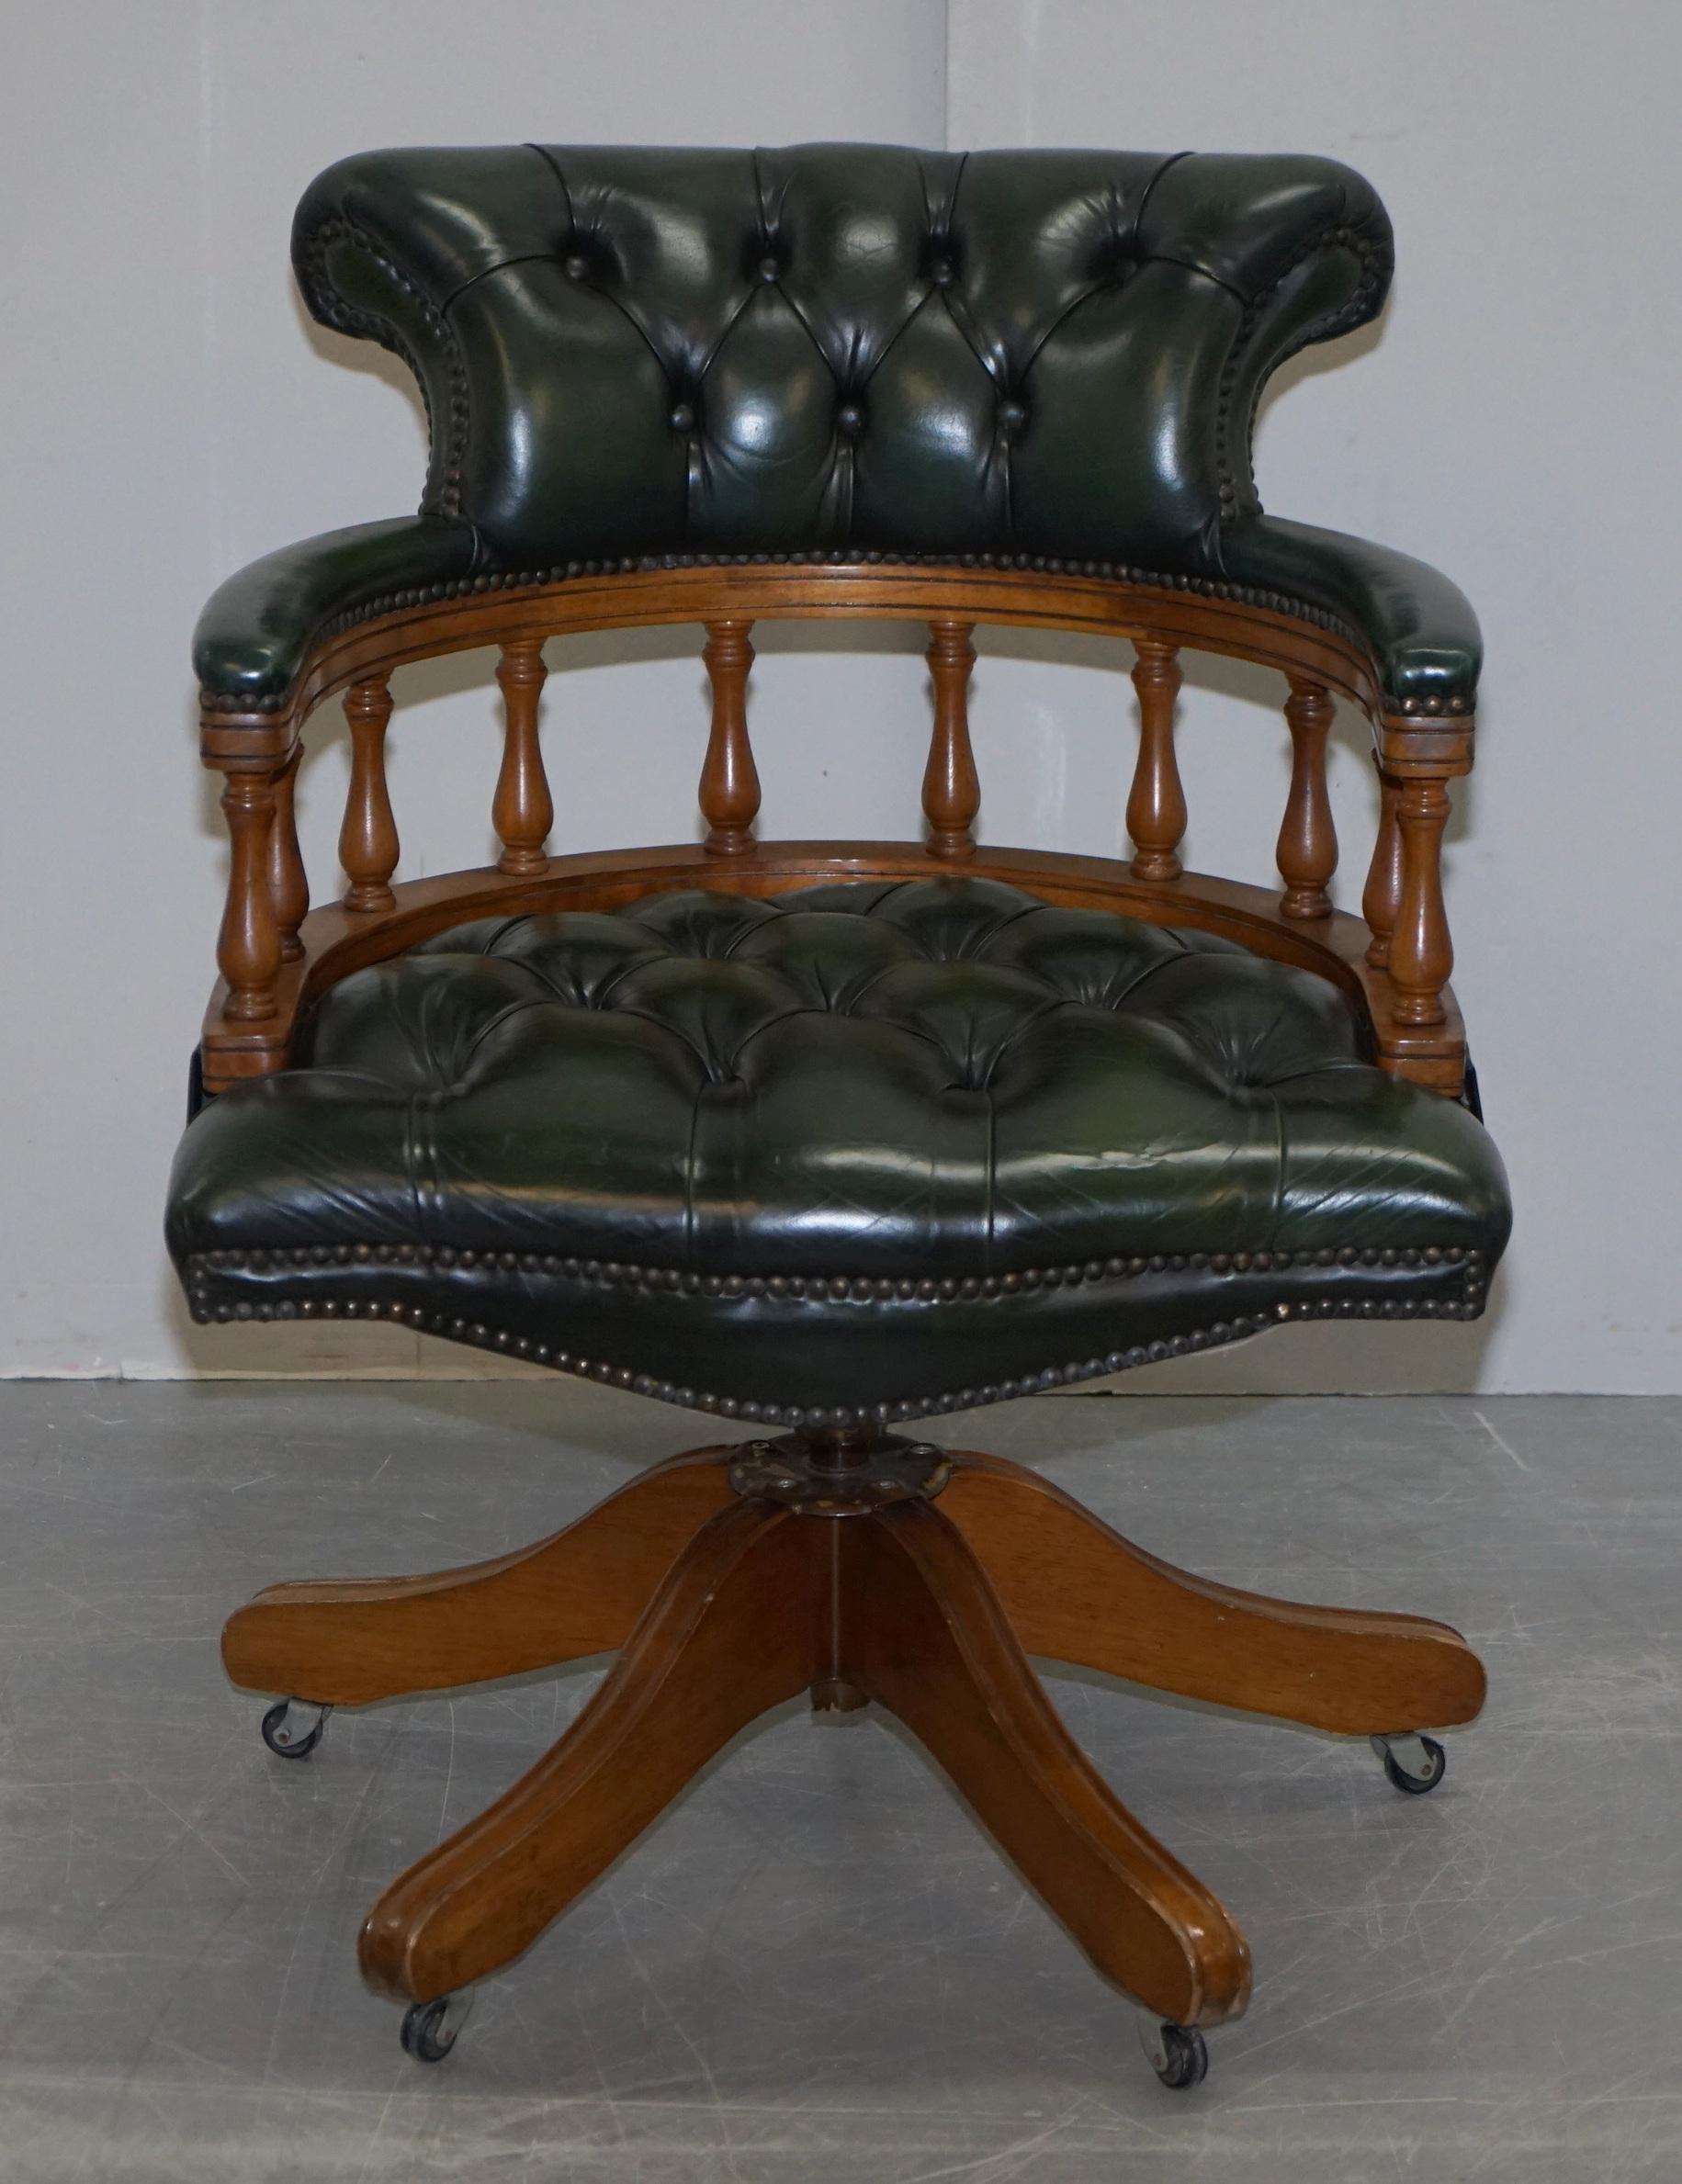 We are delighted to offer this vintage aged green leather Chesterfield captains chair with oak wood frame

A good looking well made and exceptionally comfortable captains chair, the leather has a nice worn vintage patina to it, we have deep